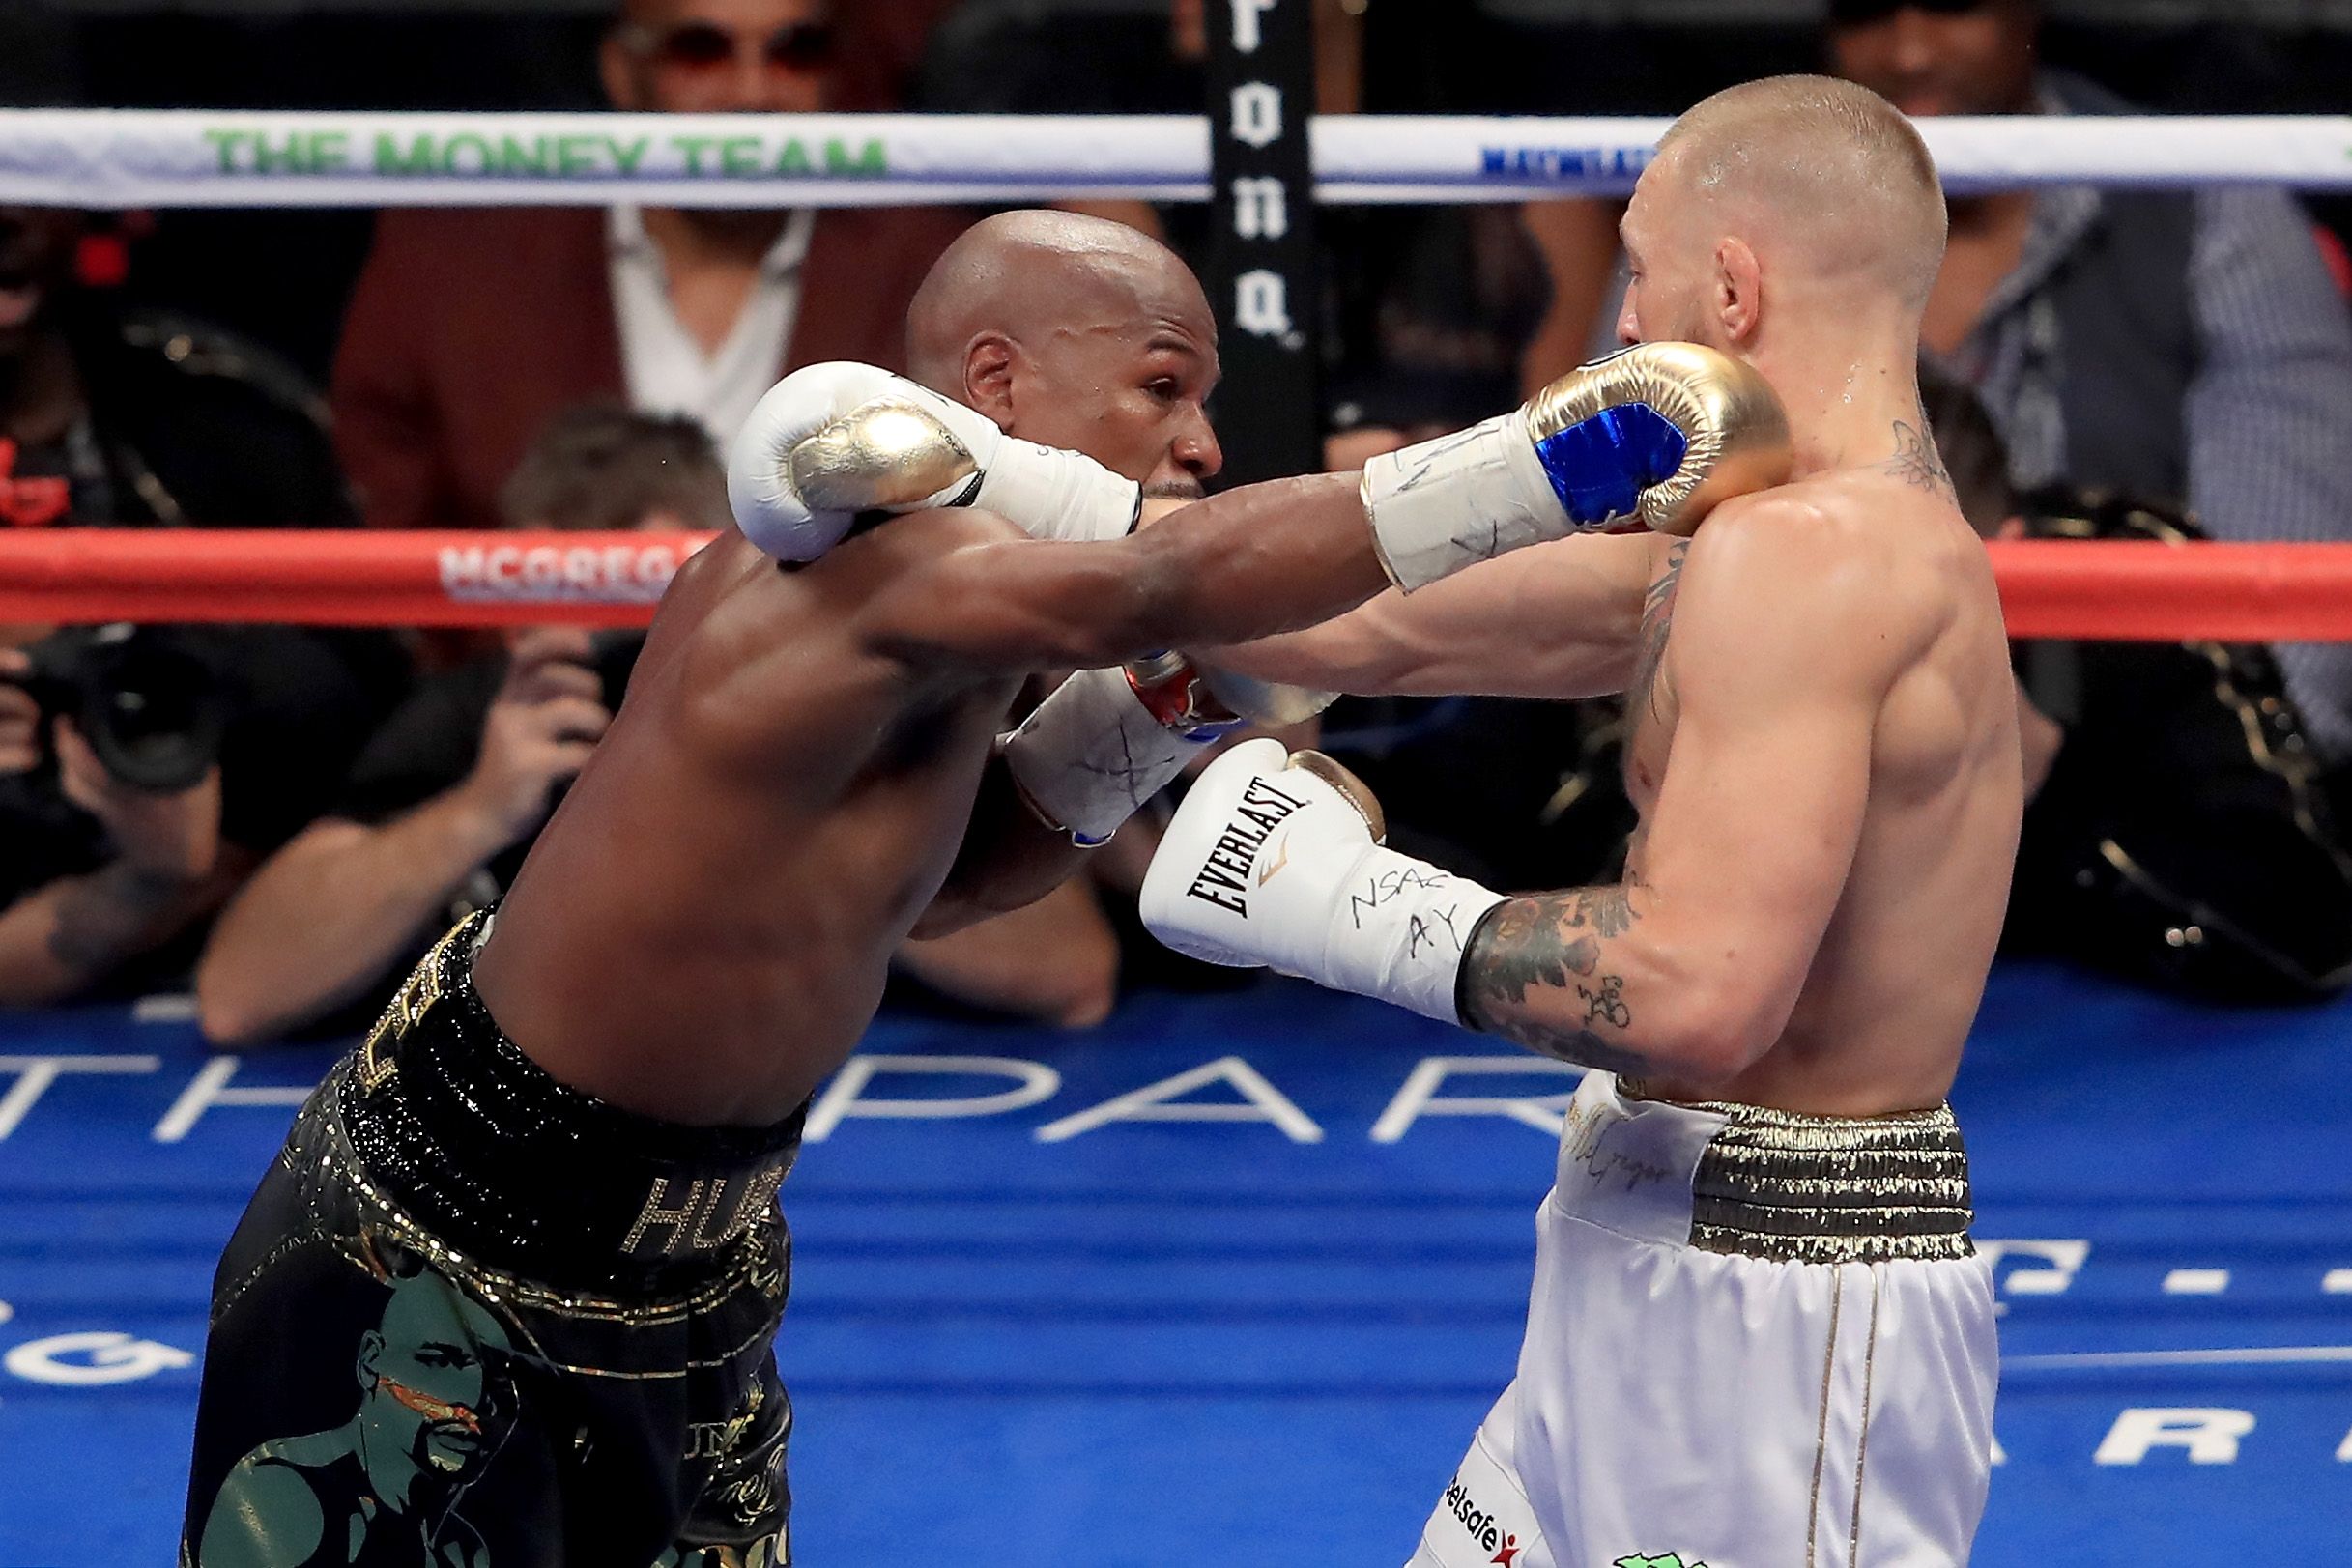 The Mayweather and McGregor Fight: Here's What You Need to Know